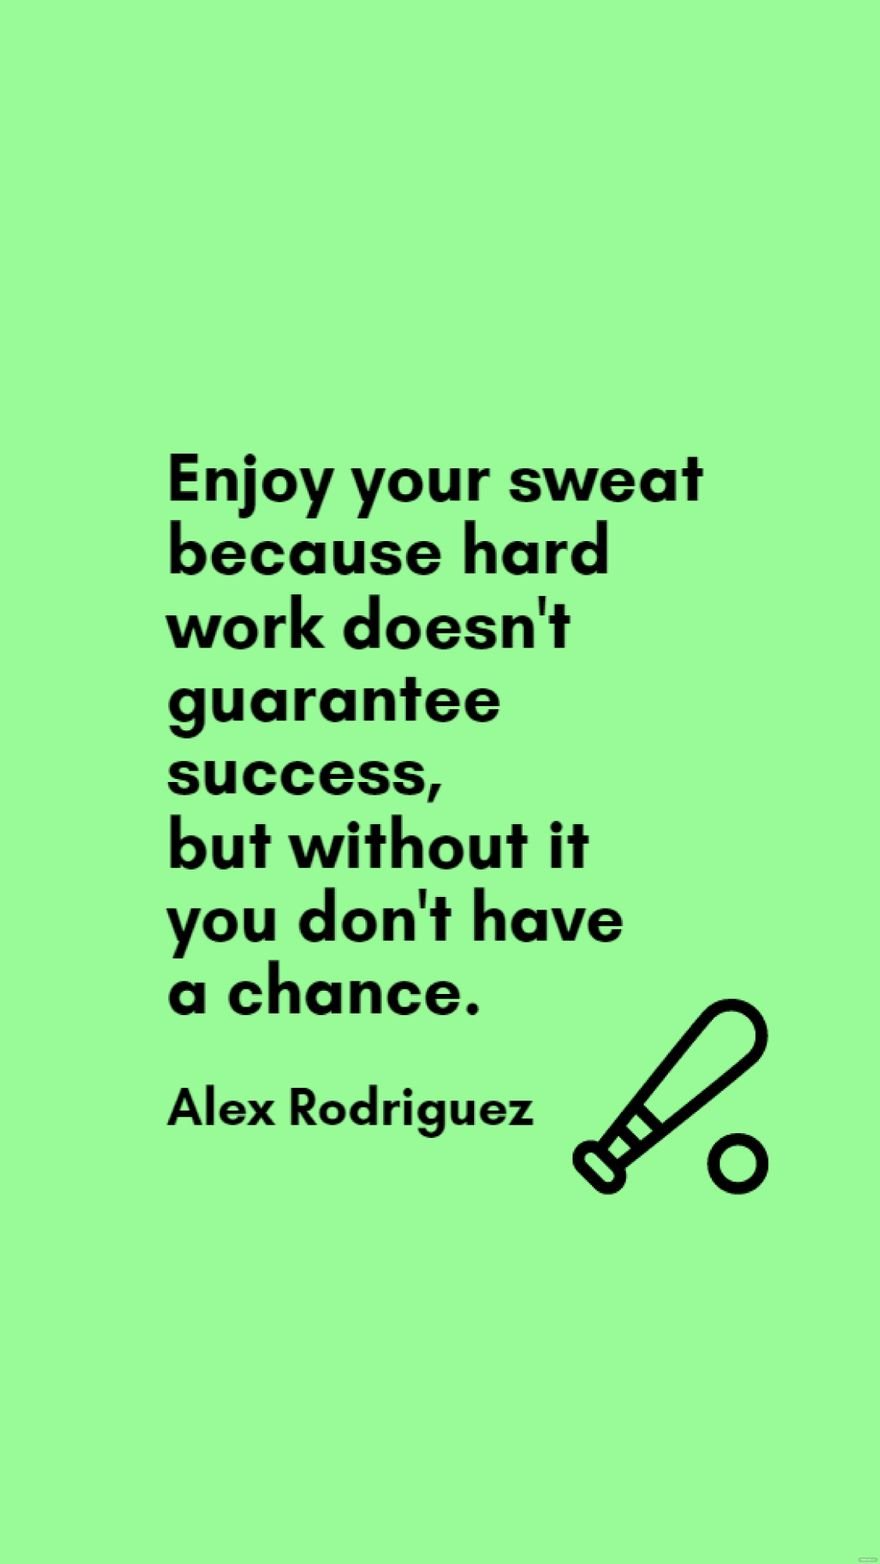 Alex Rodriguez - Enjoy your sweat because hard work doesn't guarantee success, but without it you don't have a chance.